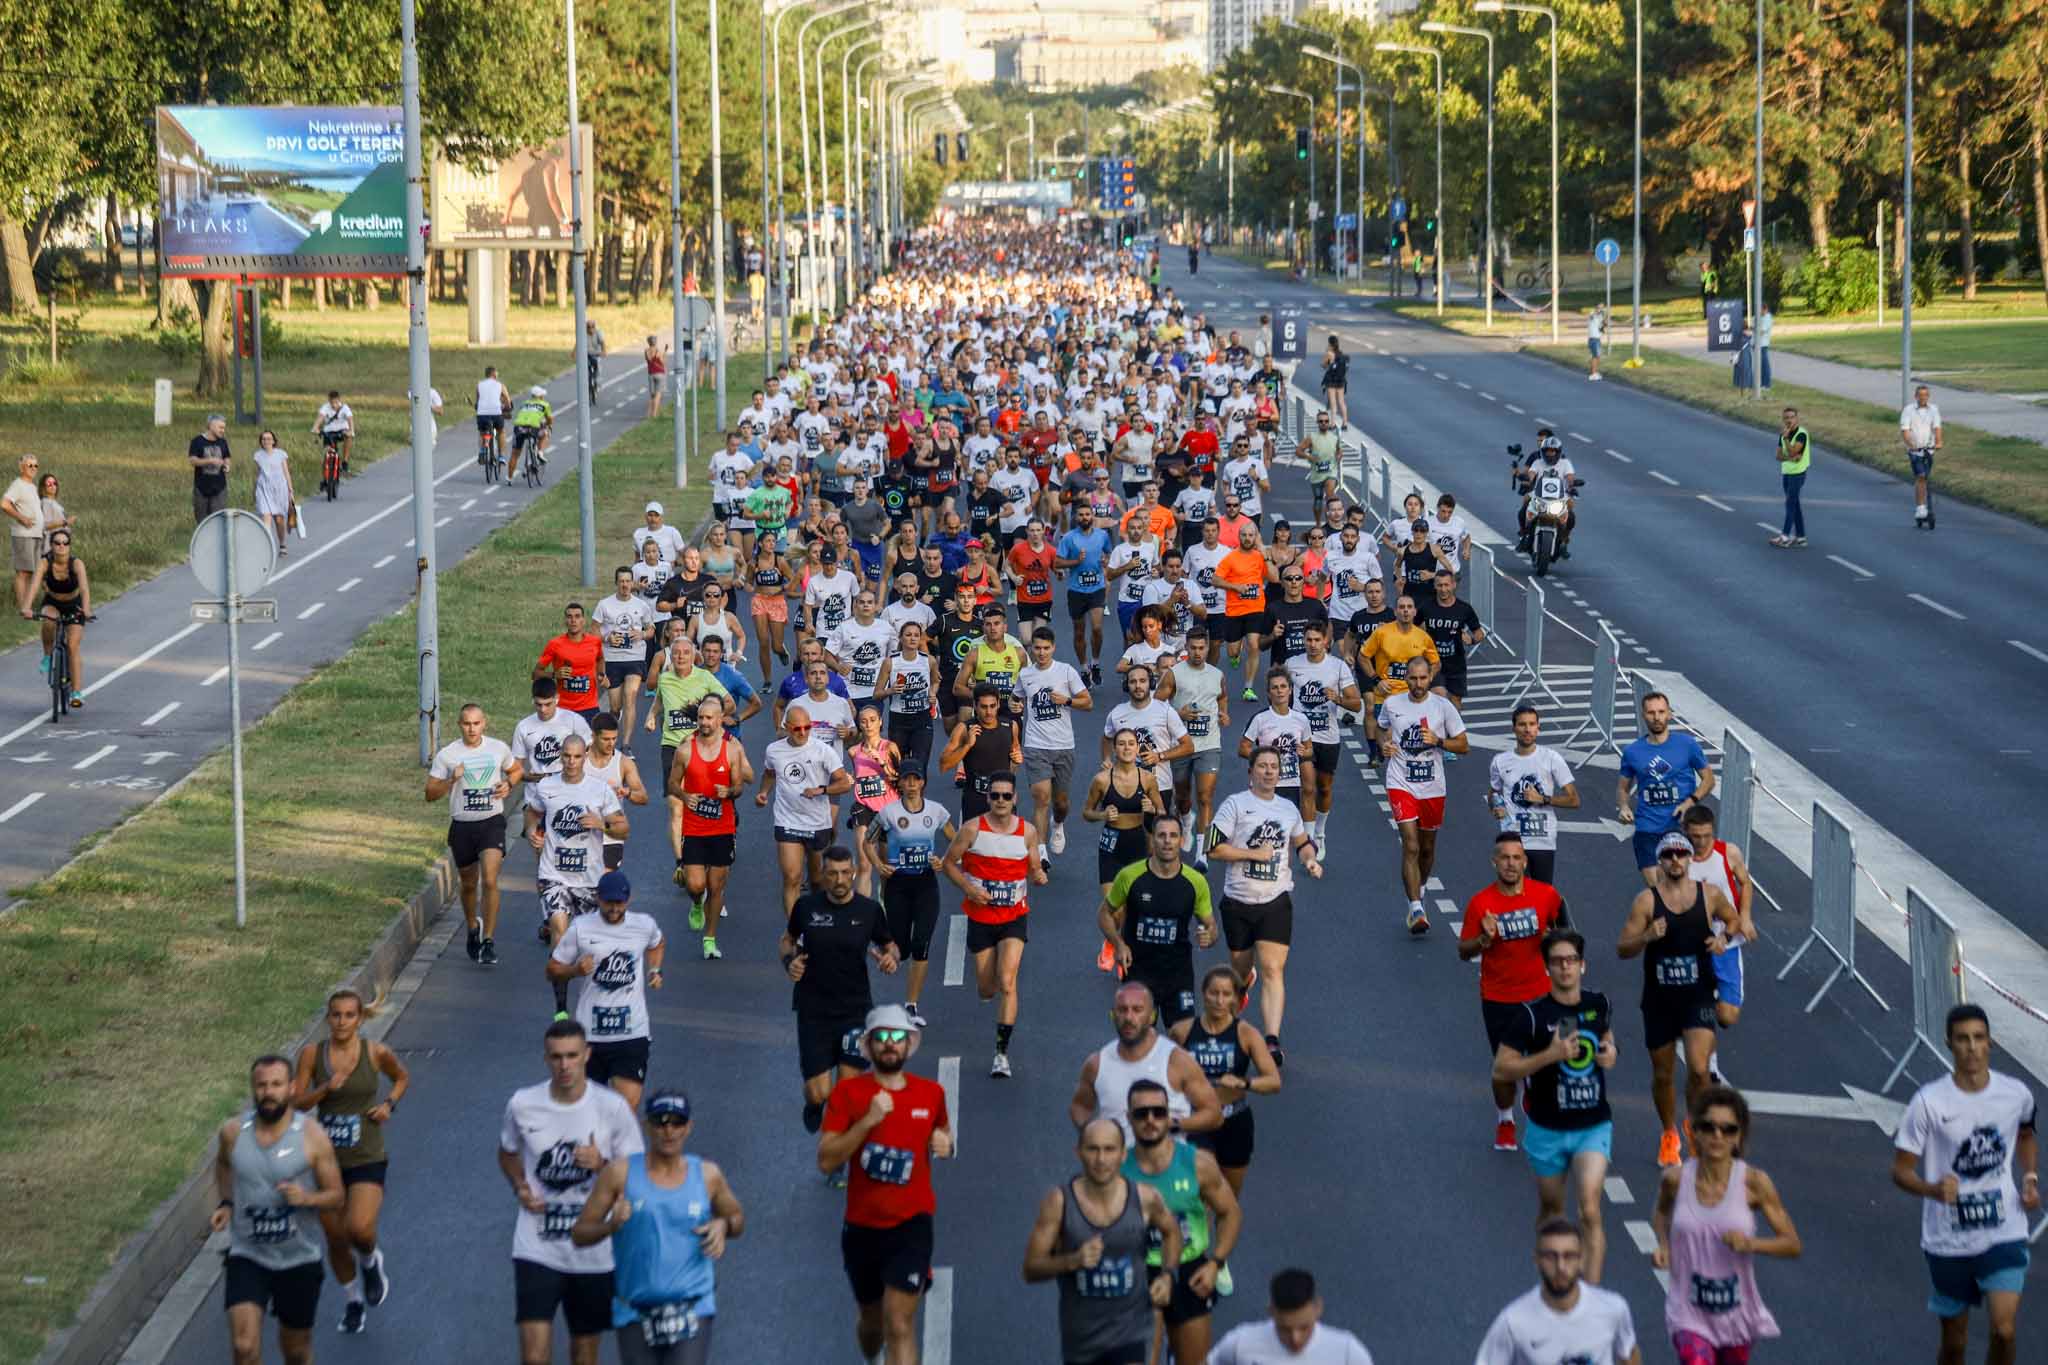 “The Belgrade 10K” at the opening of the second part of the running season